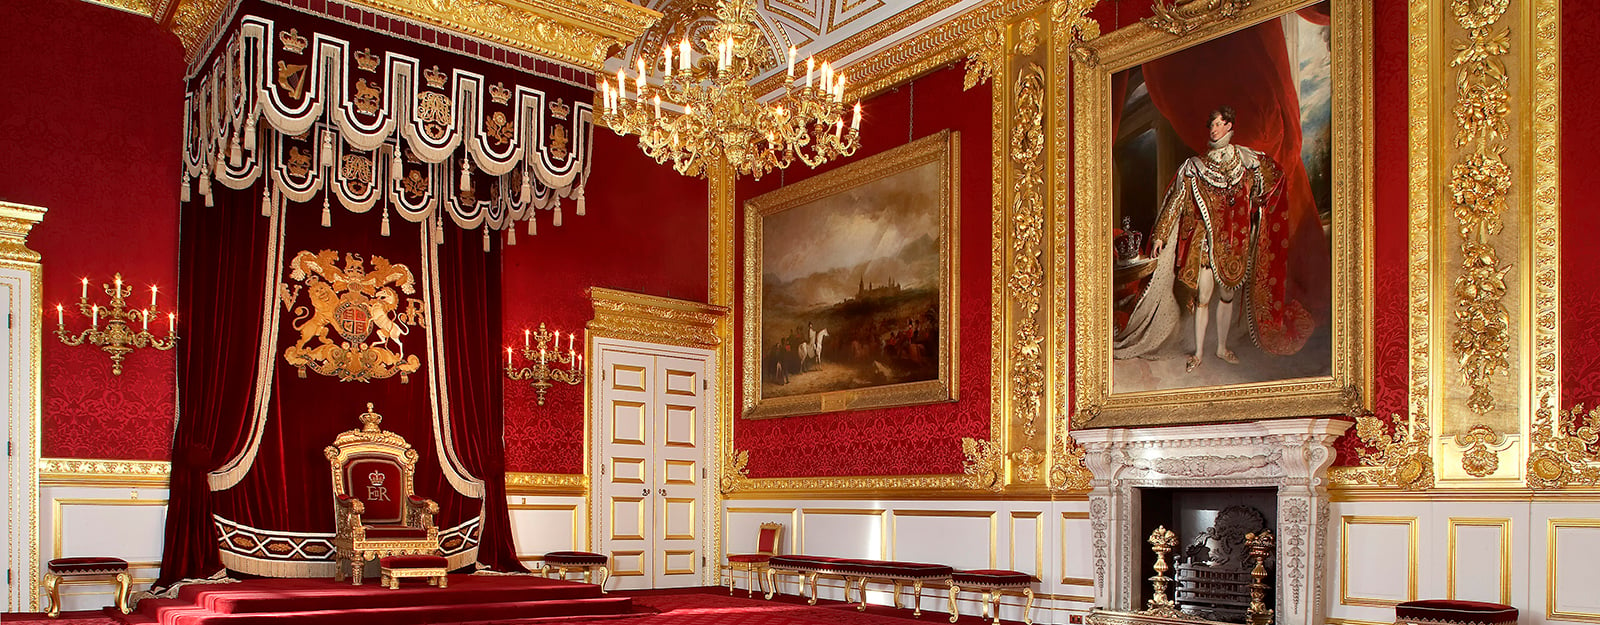 Throne Room at St James's Palace